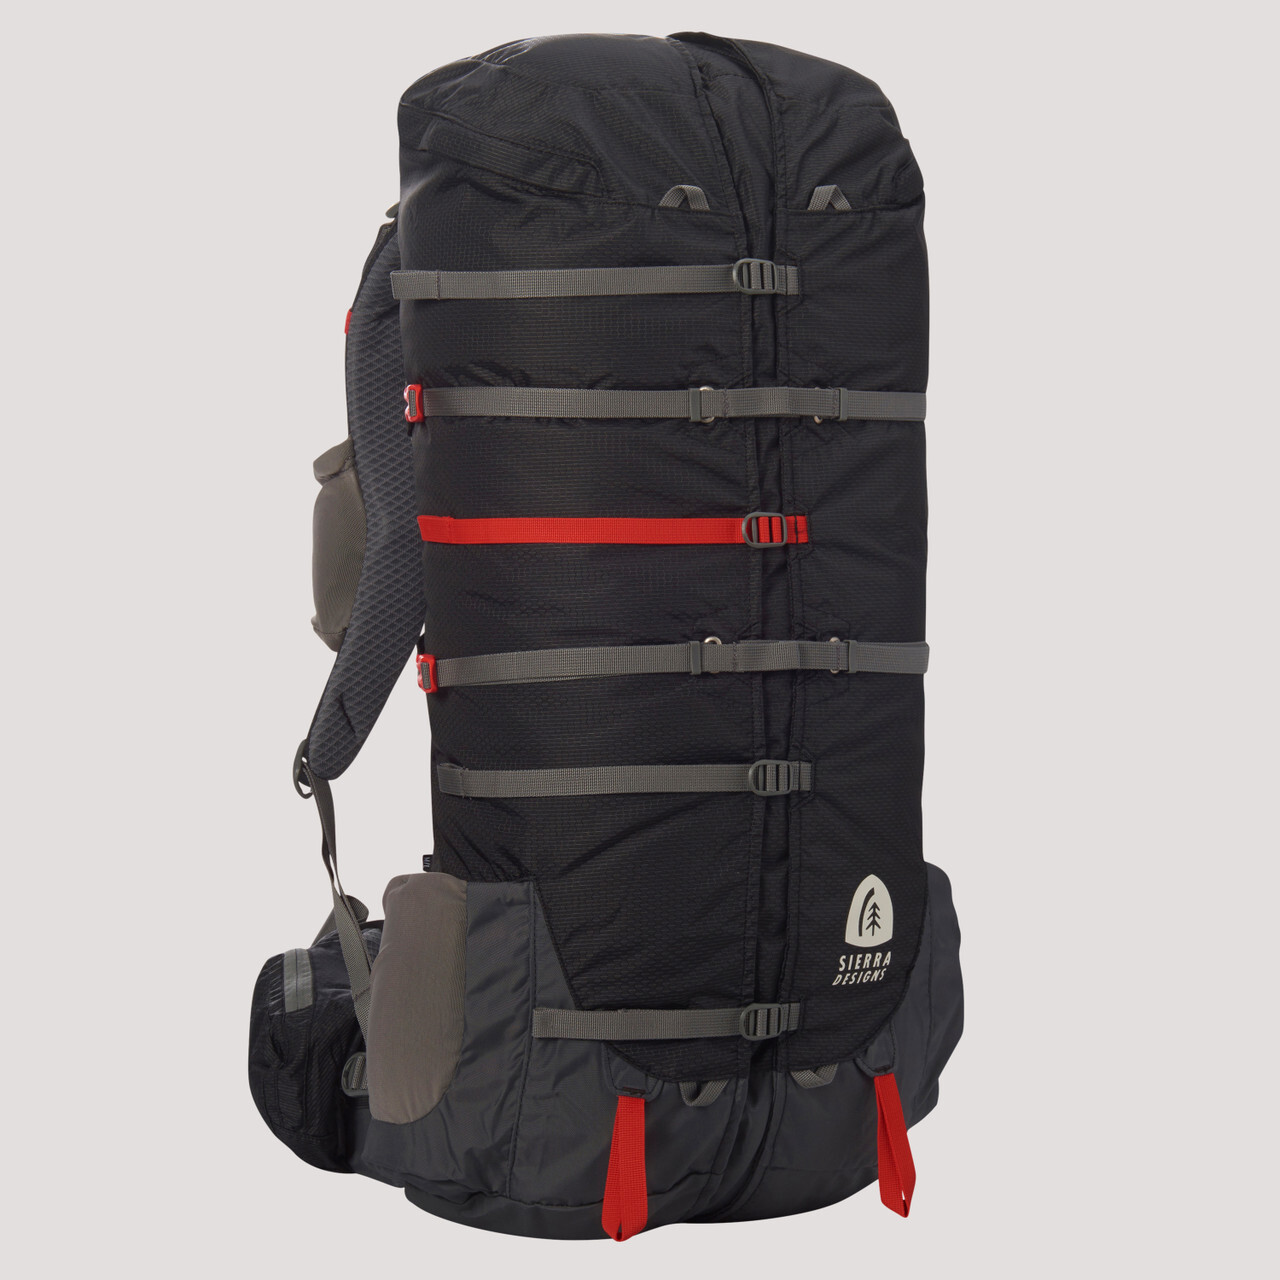 Sierra Designs Flex Capacitor 40-60L backpack review: an